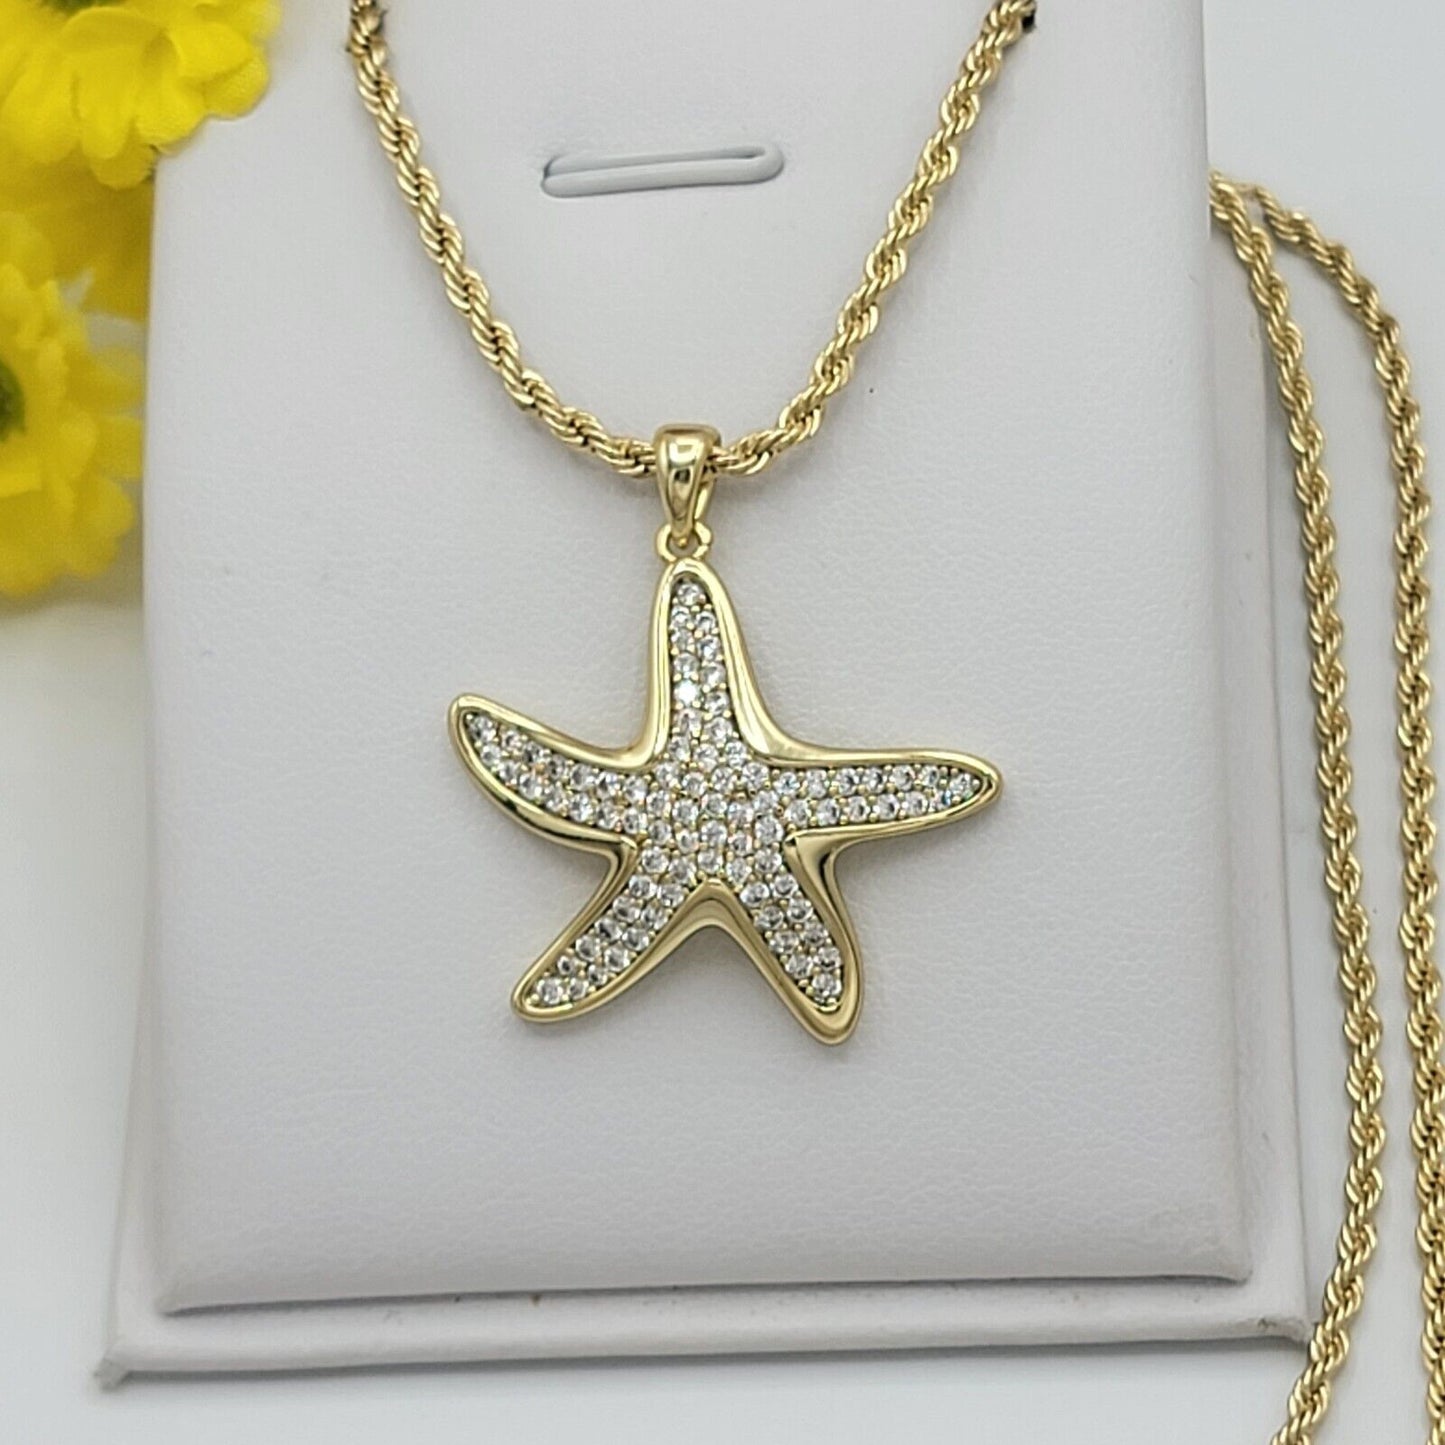 Necklaces - 14K Gold Plated. Shiny Icy Starfish Pendant & Chain.